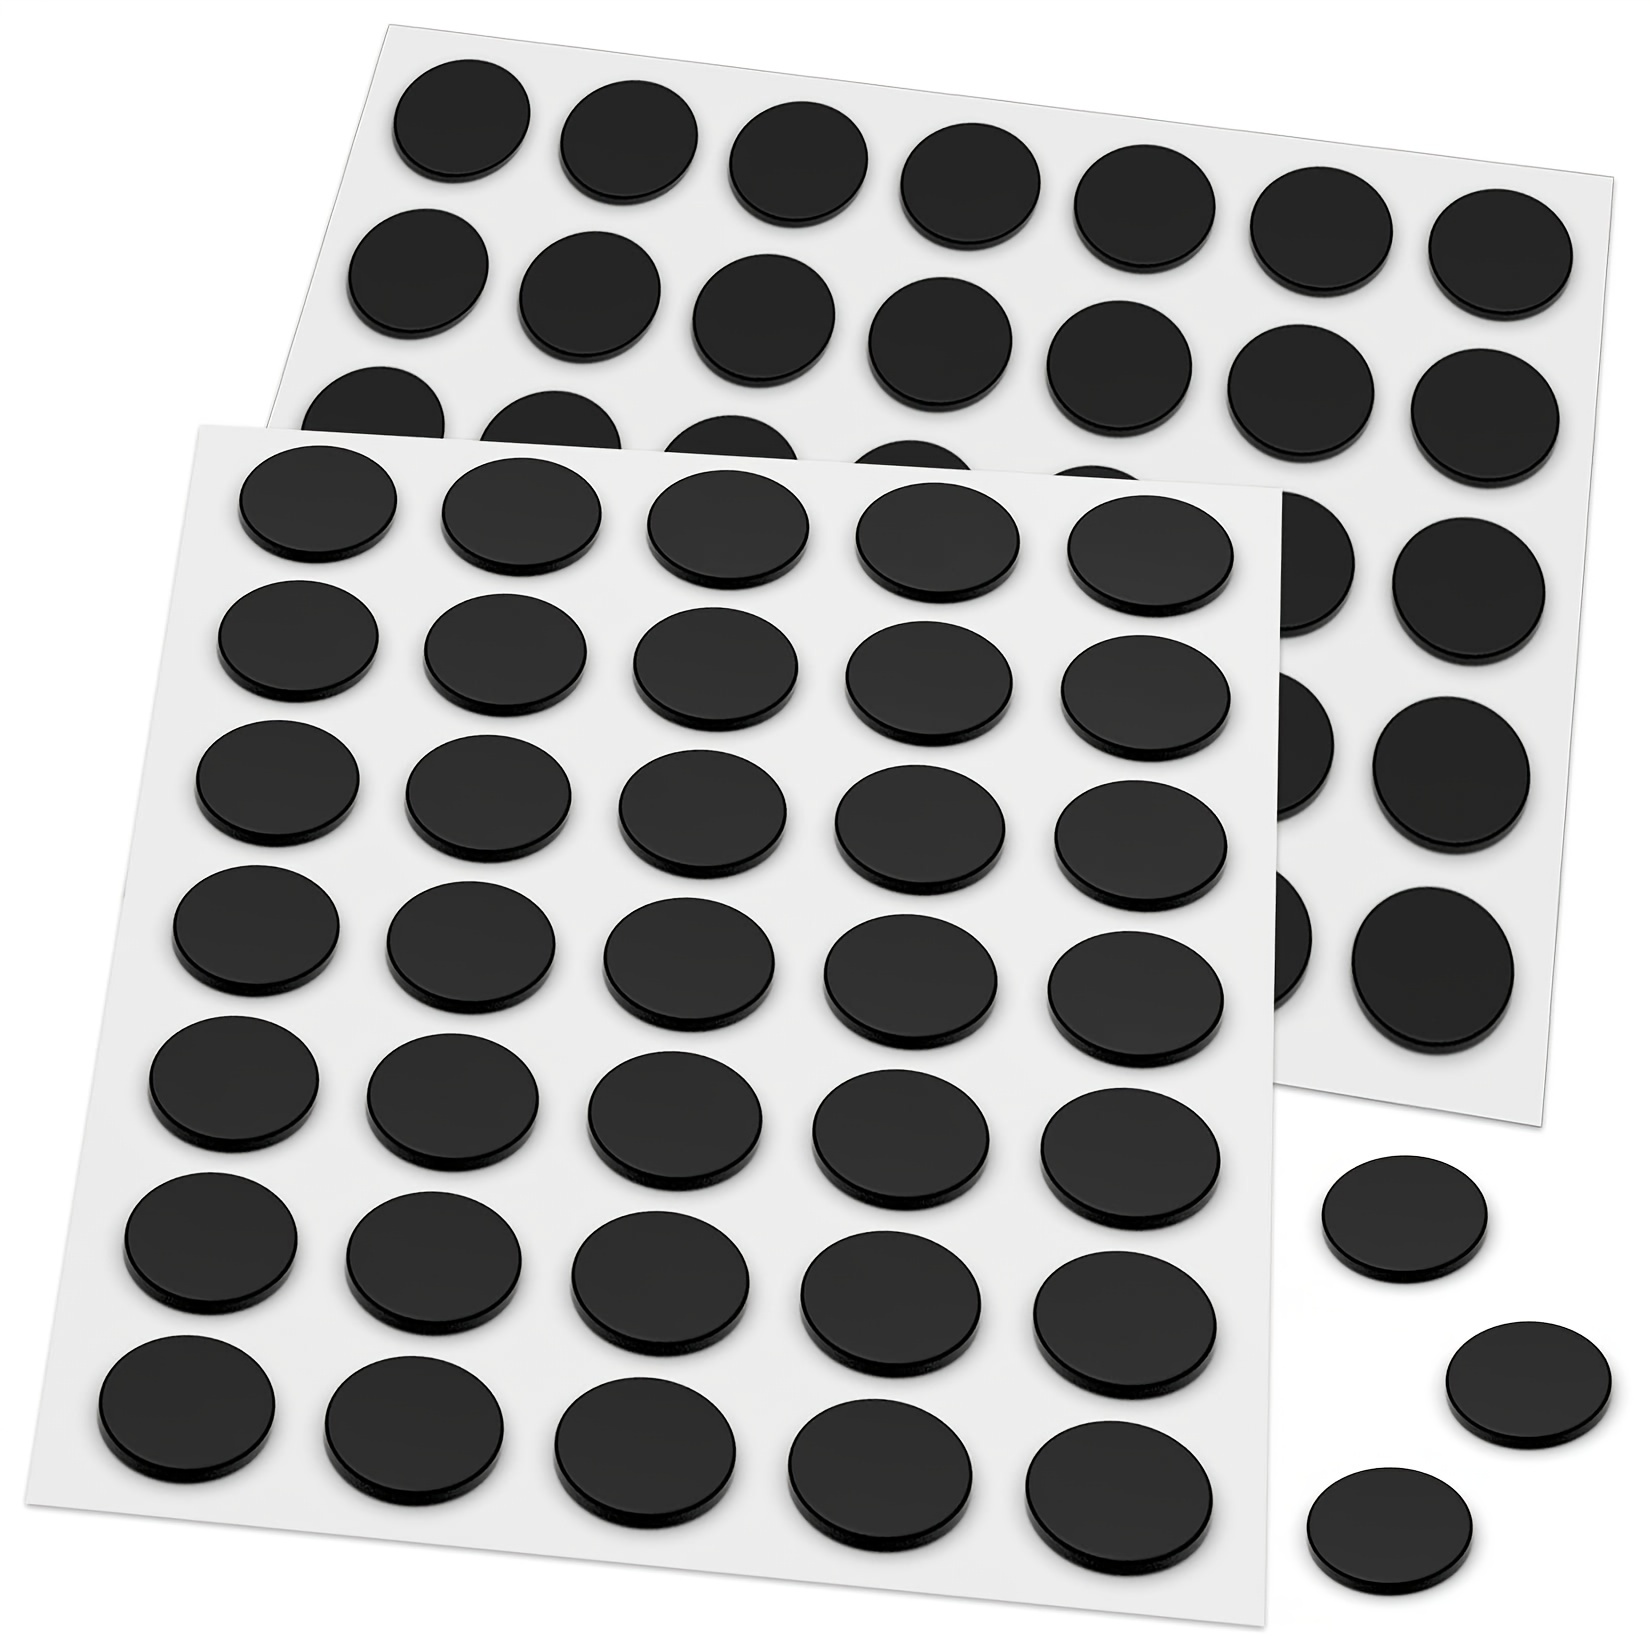 Self Adhesive Magnets, Small Sticky Magnets for Arts and Crafts